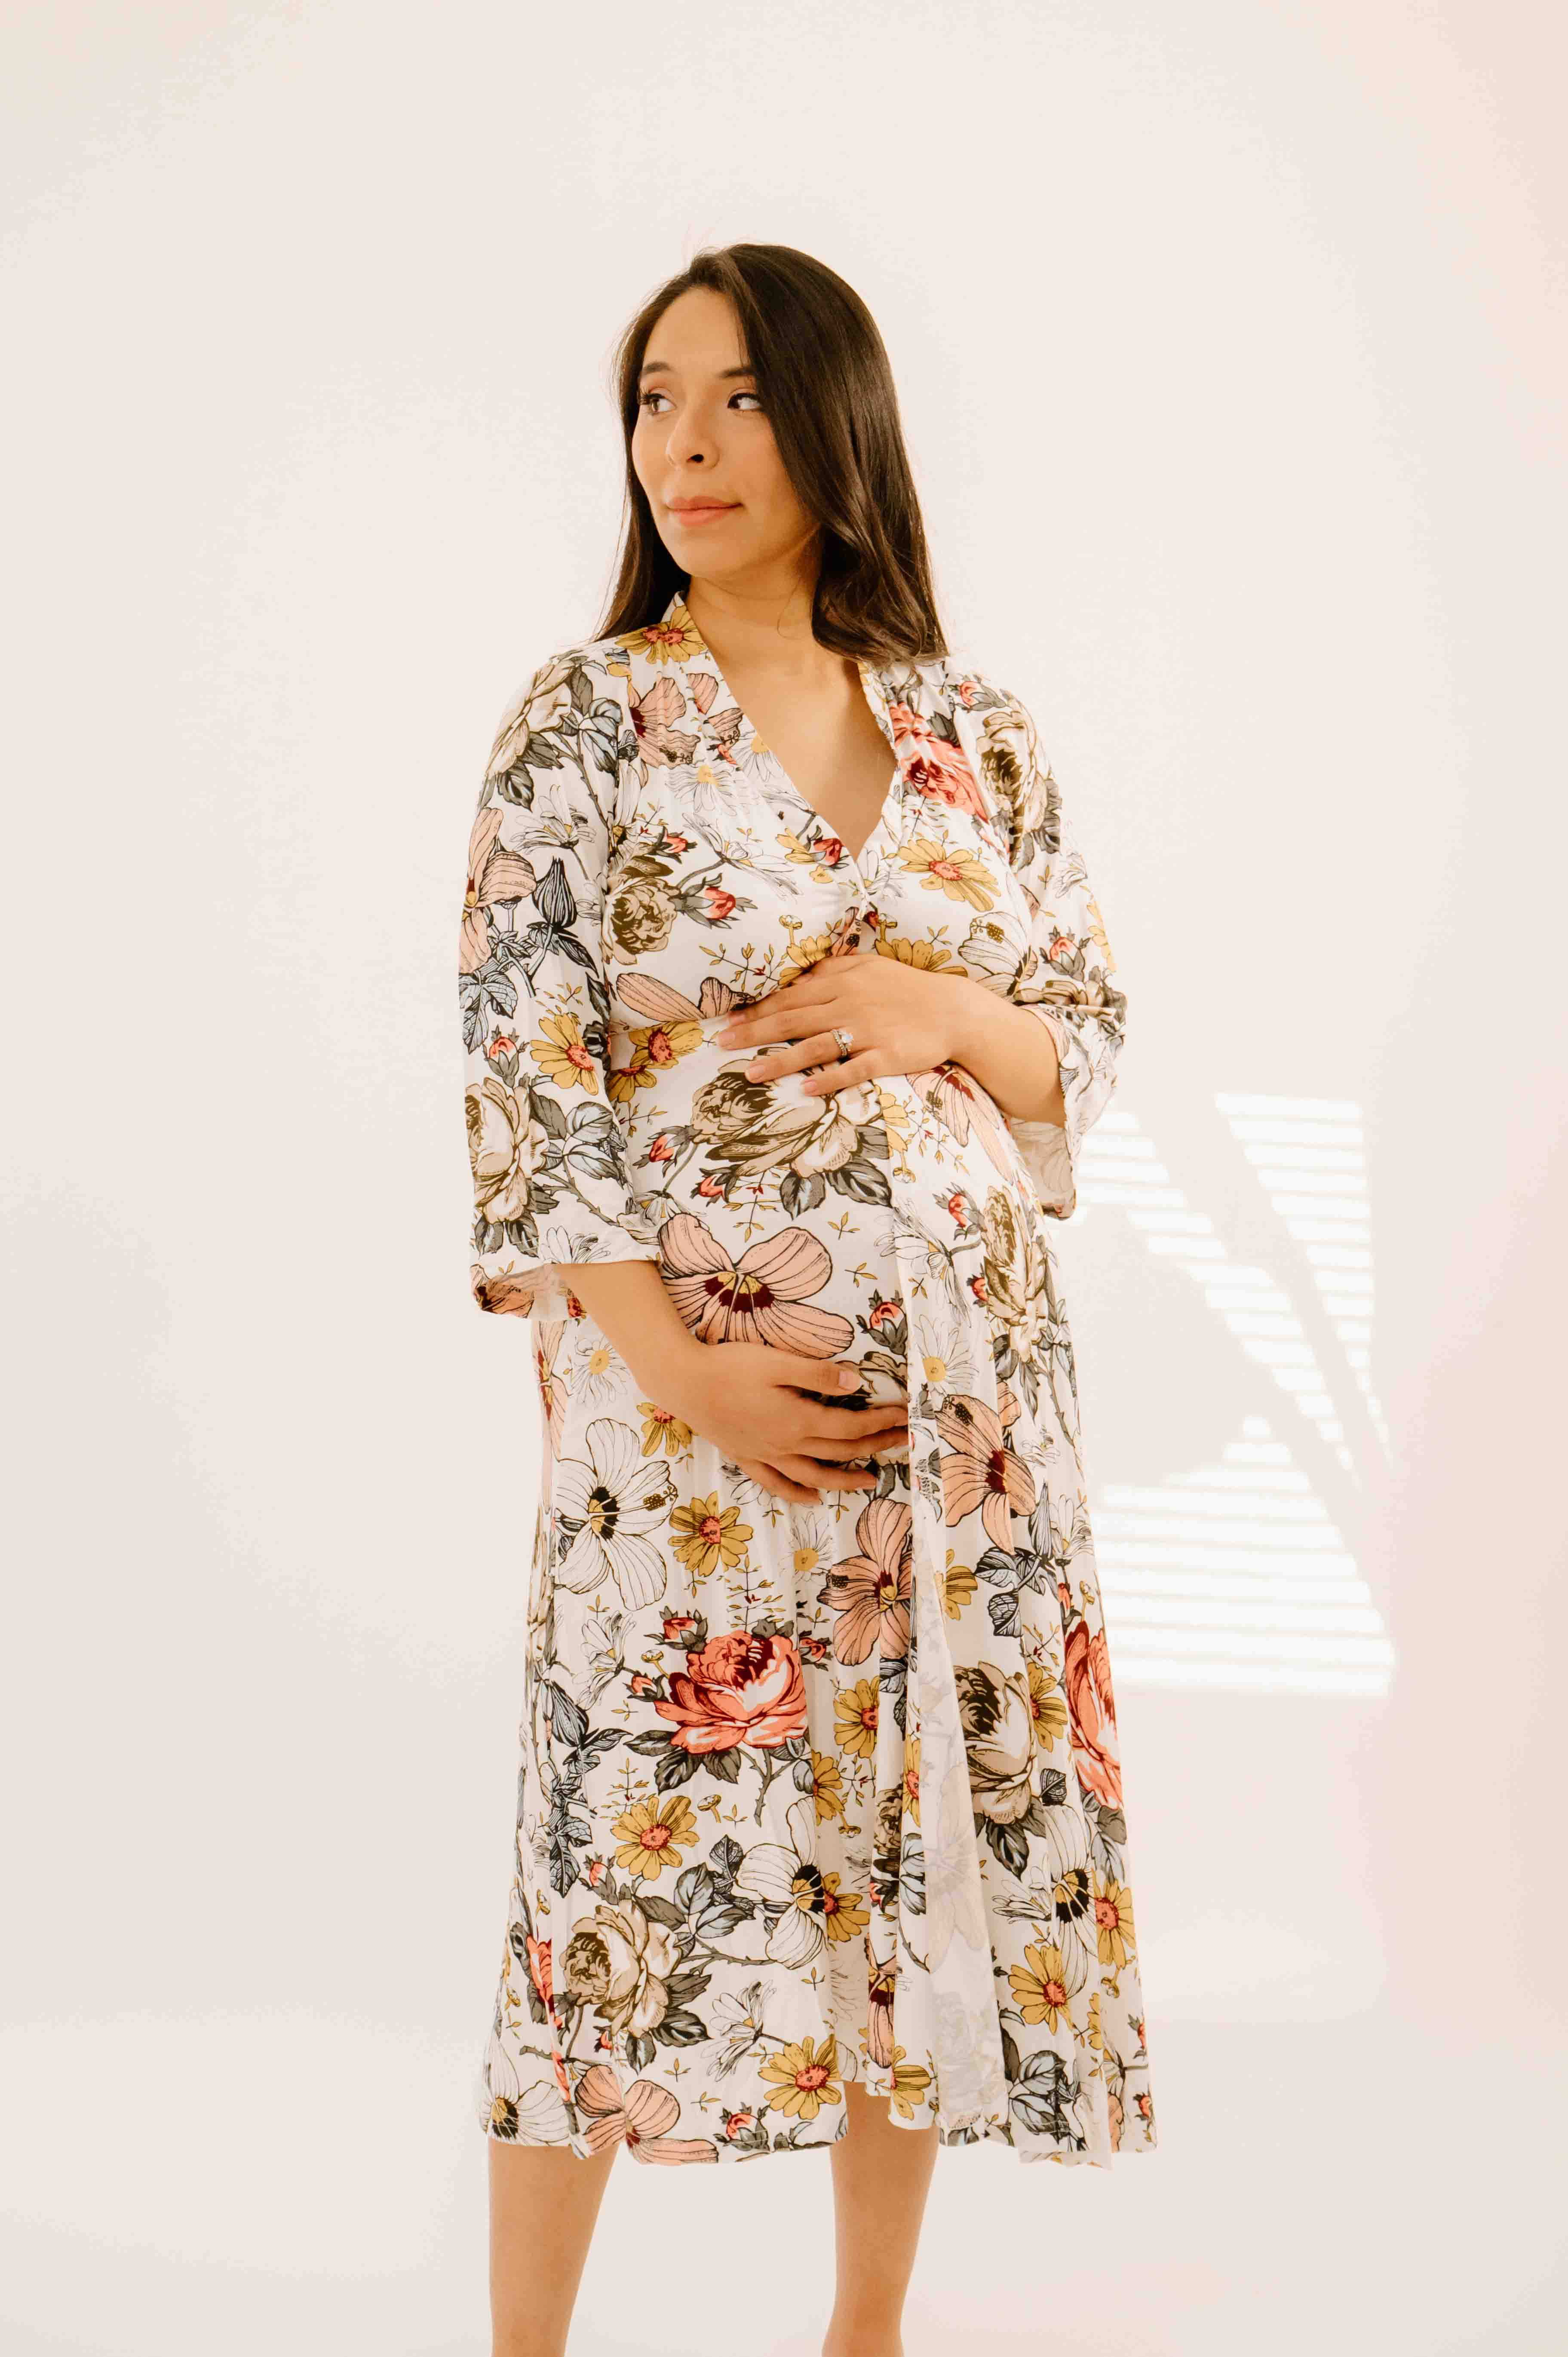 Sage Green Maternity Delivery Hospital Robe & Floral Labor Gown Set